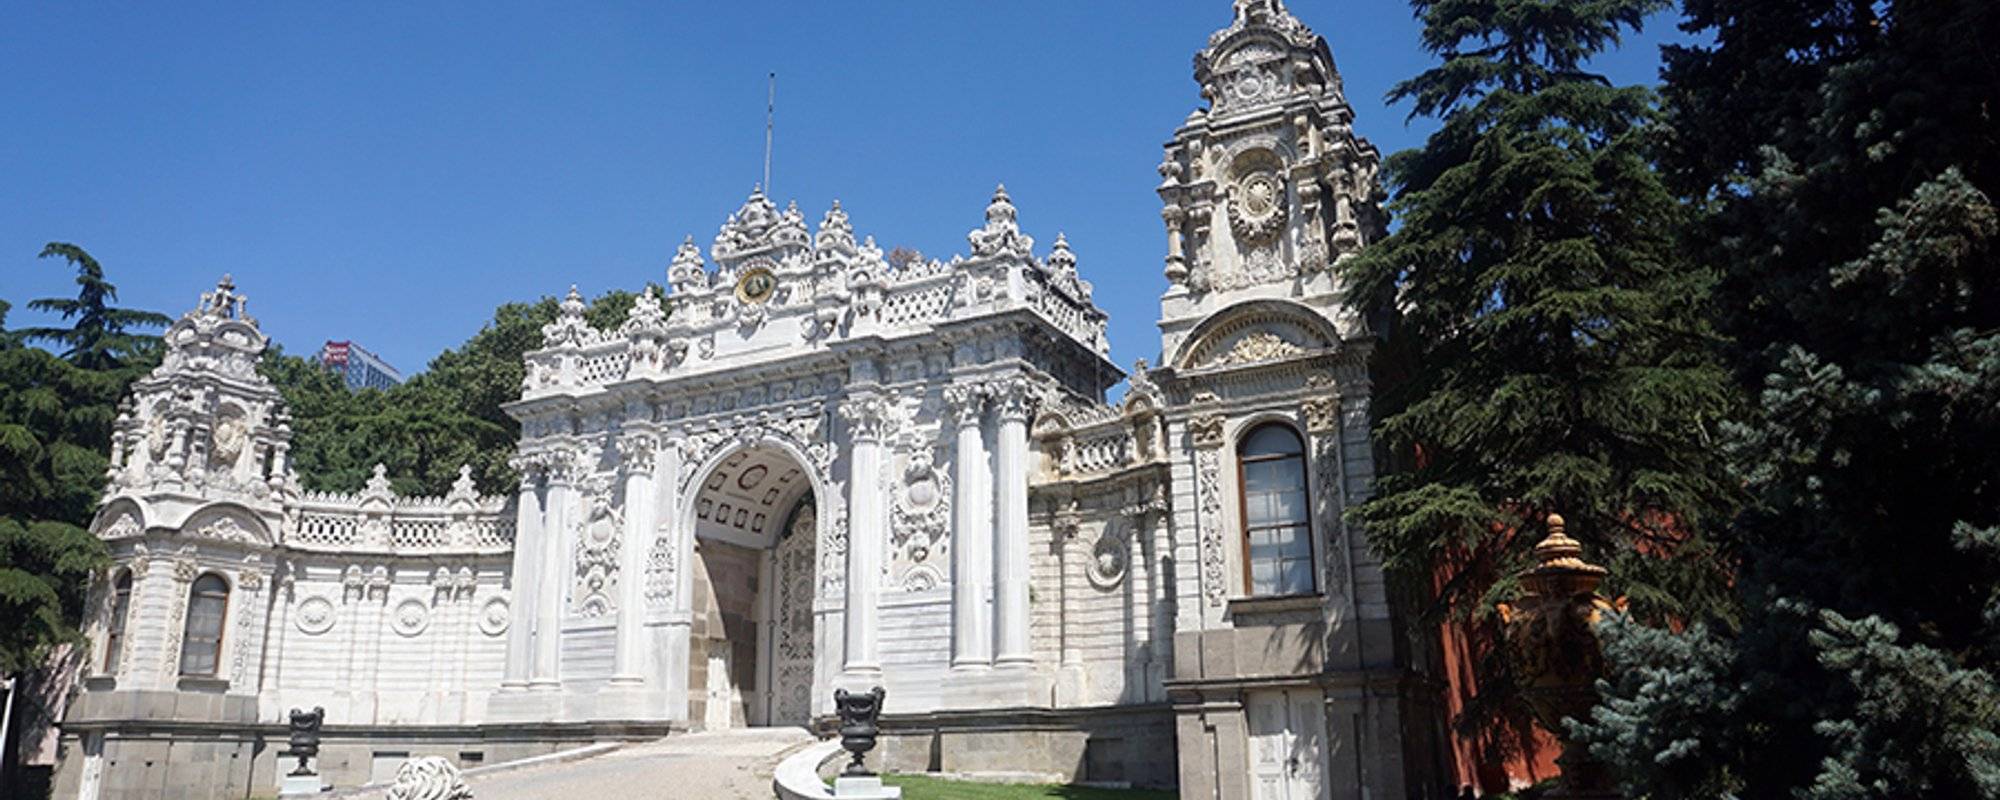 Istanbul Trip Day Two - Dolmabahce Palace